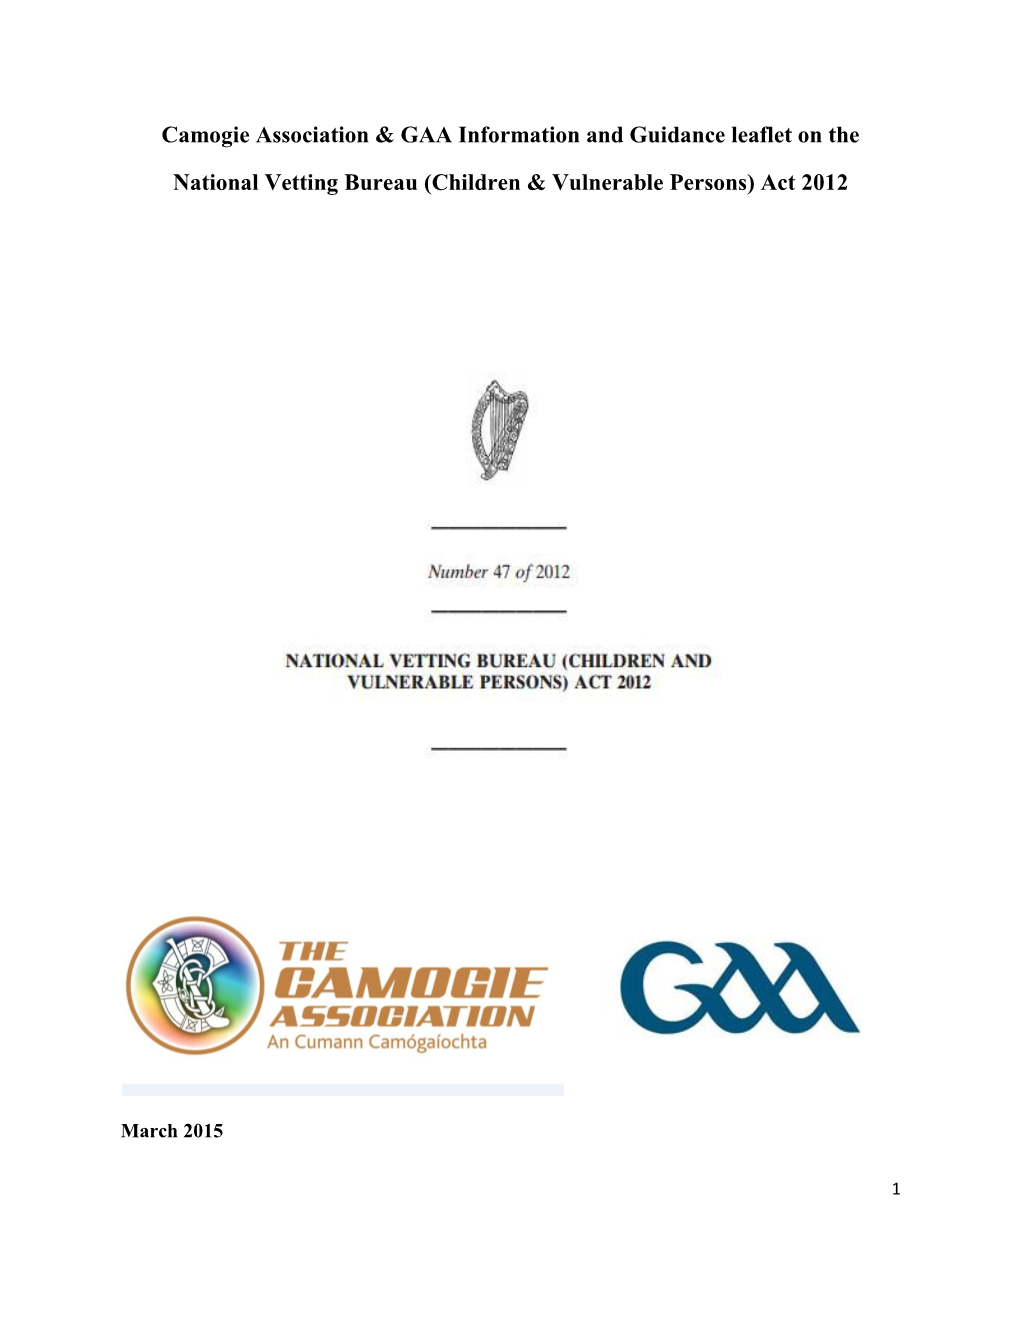 Camogie Association & GAA Information and Guidance Leaflet On